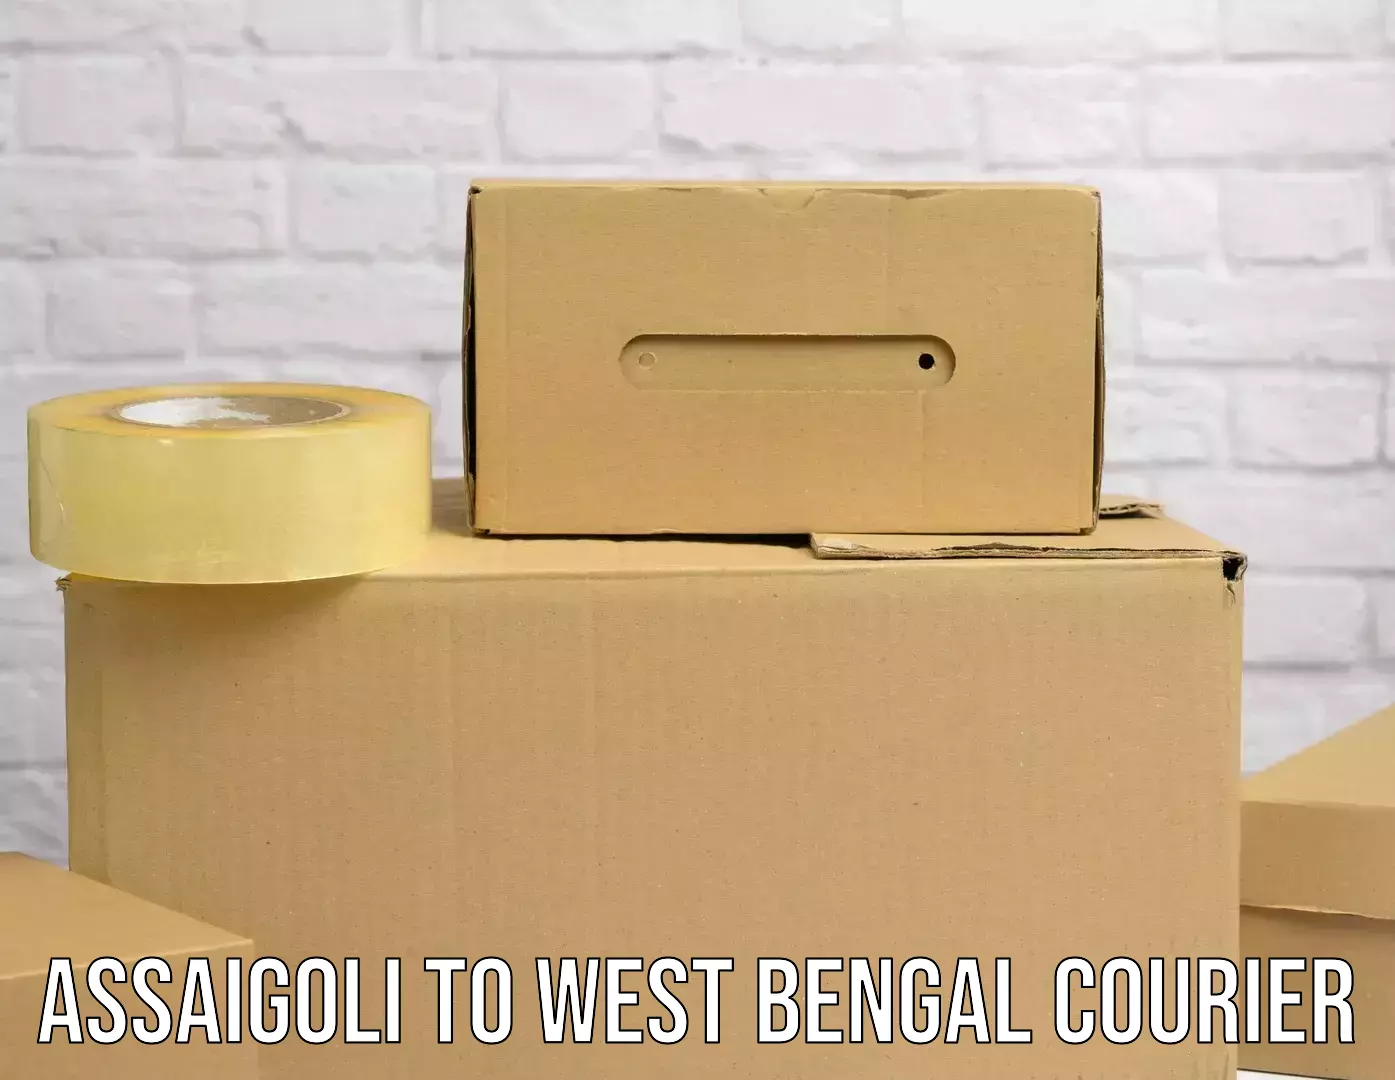 Modern delivery methods Assaigoli to West Bengal